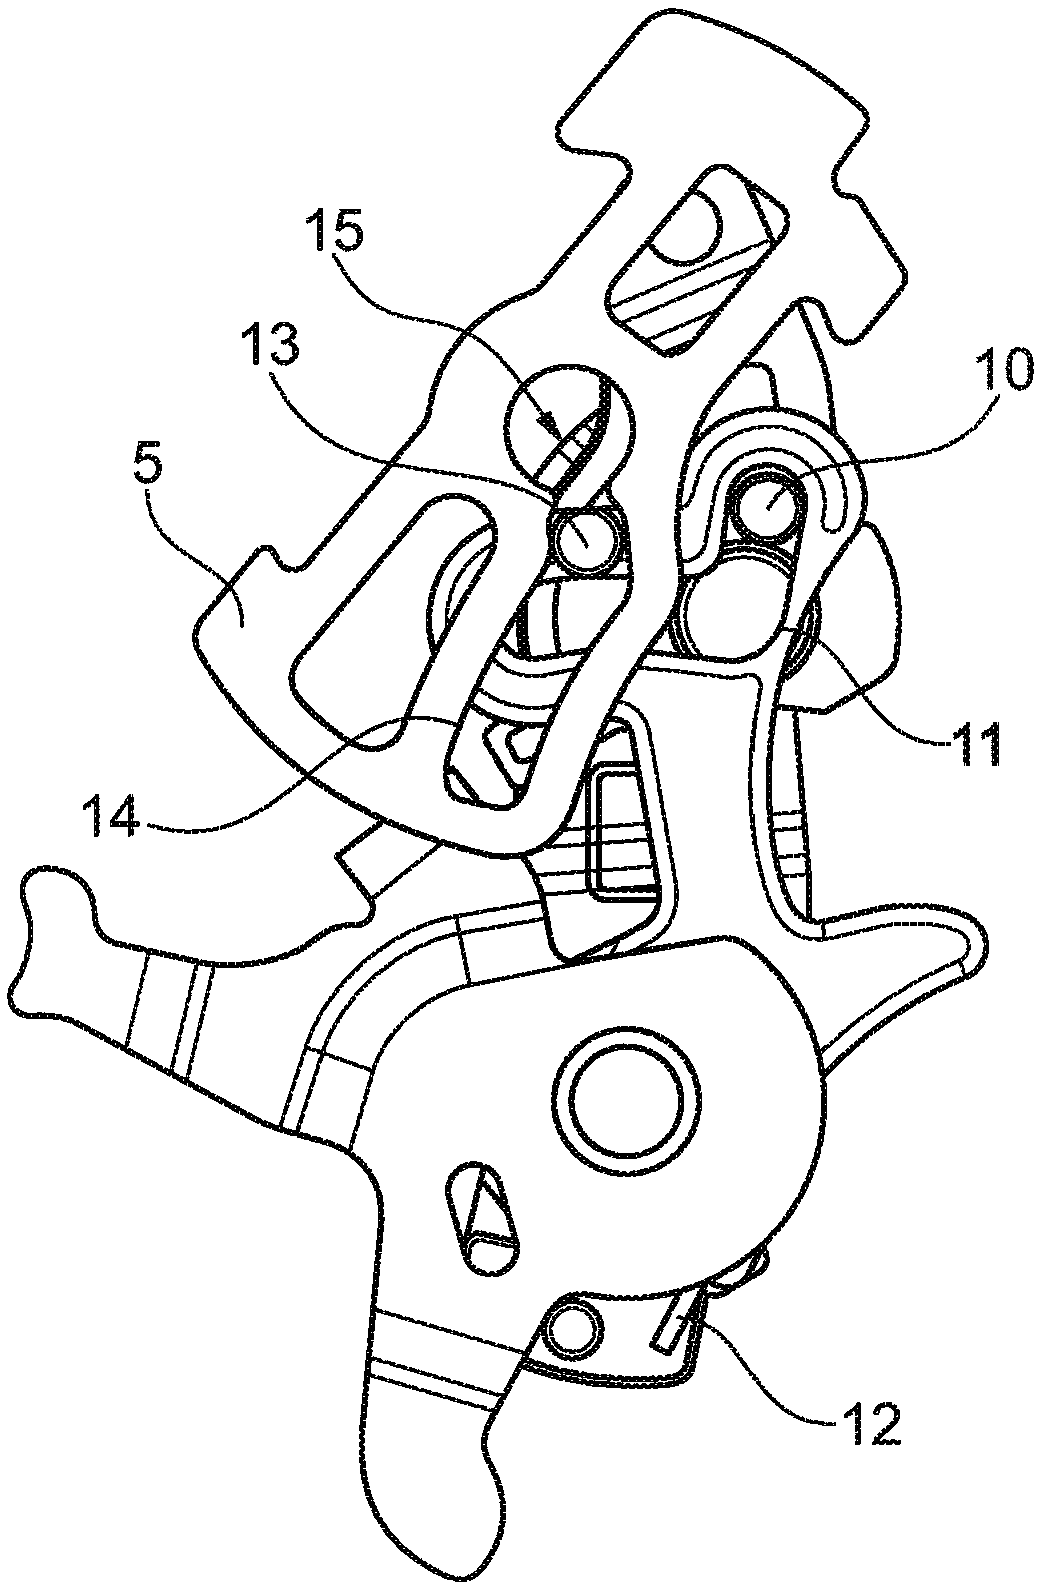 Locking device for a motor vehicle